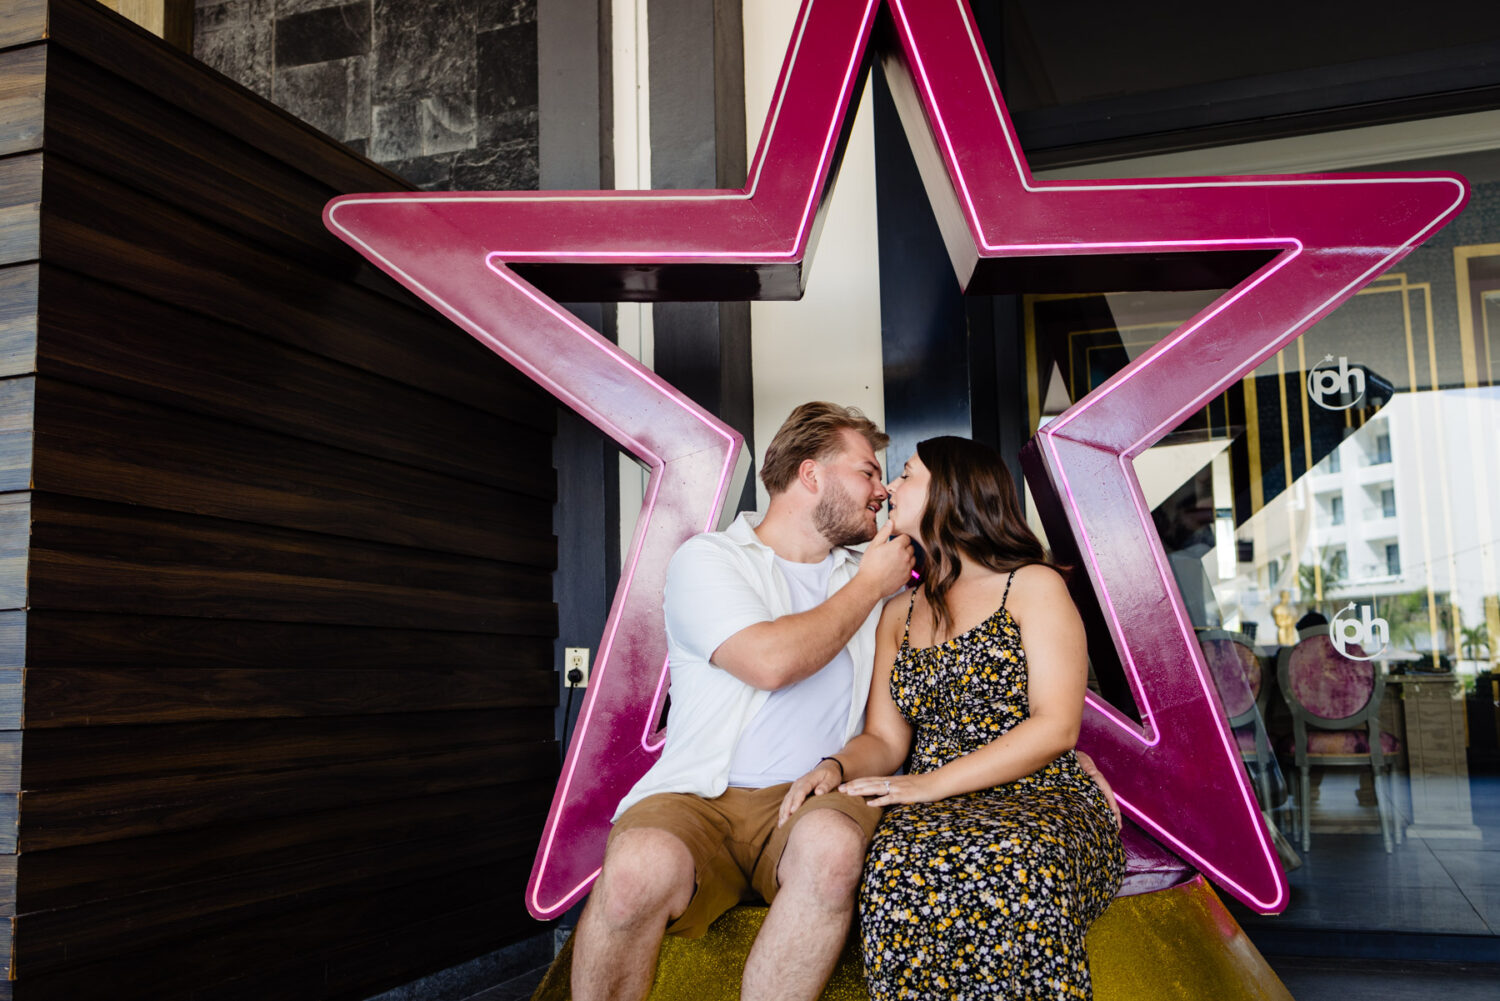 Planet Hollywood Cancun Engagement Photos